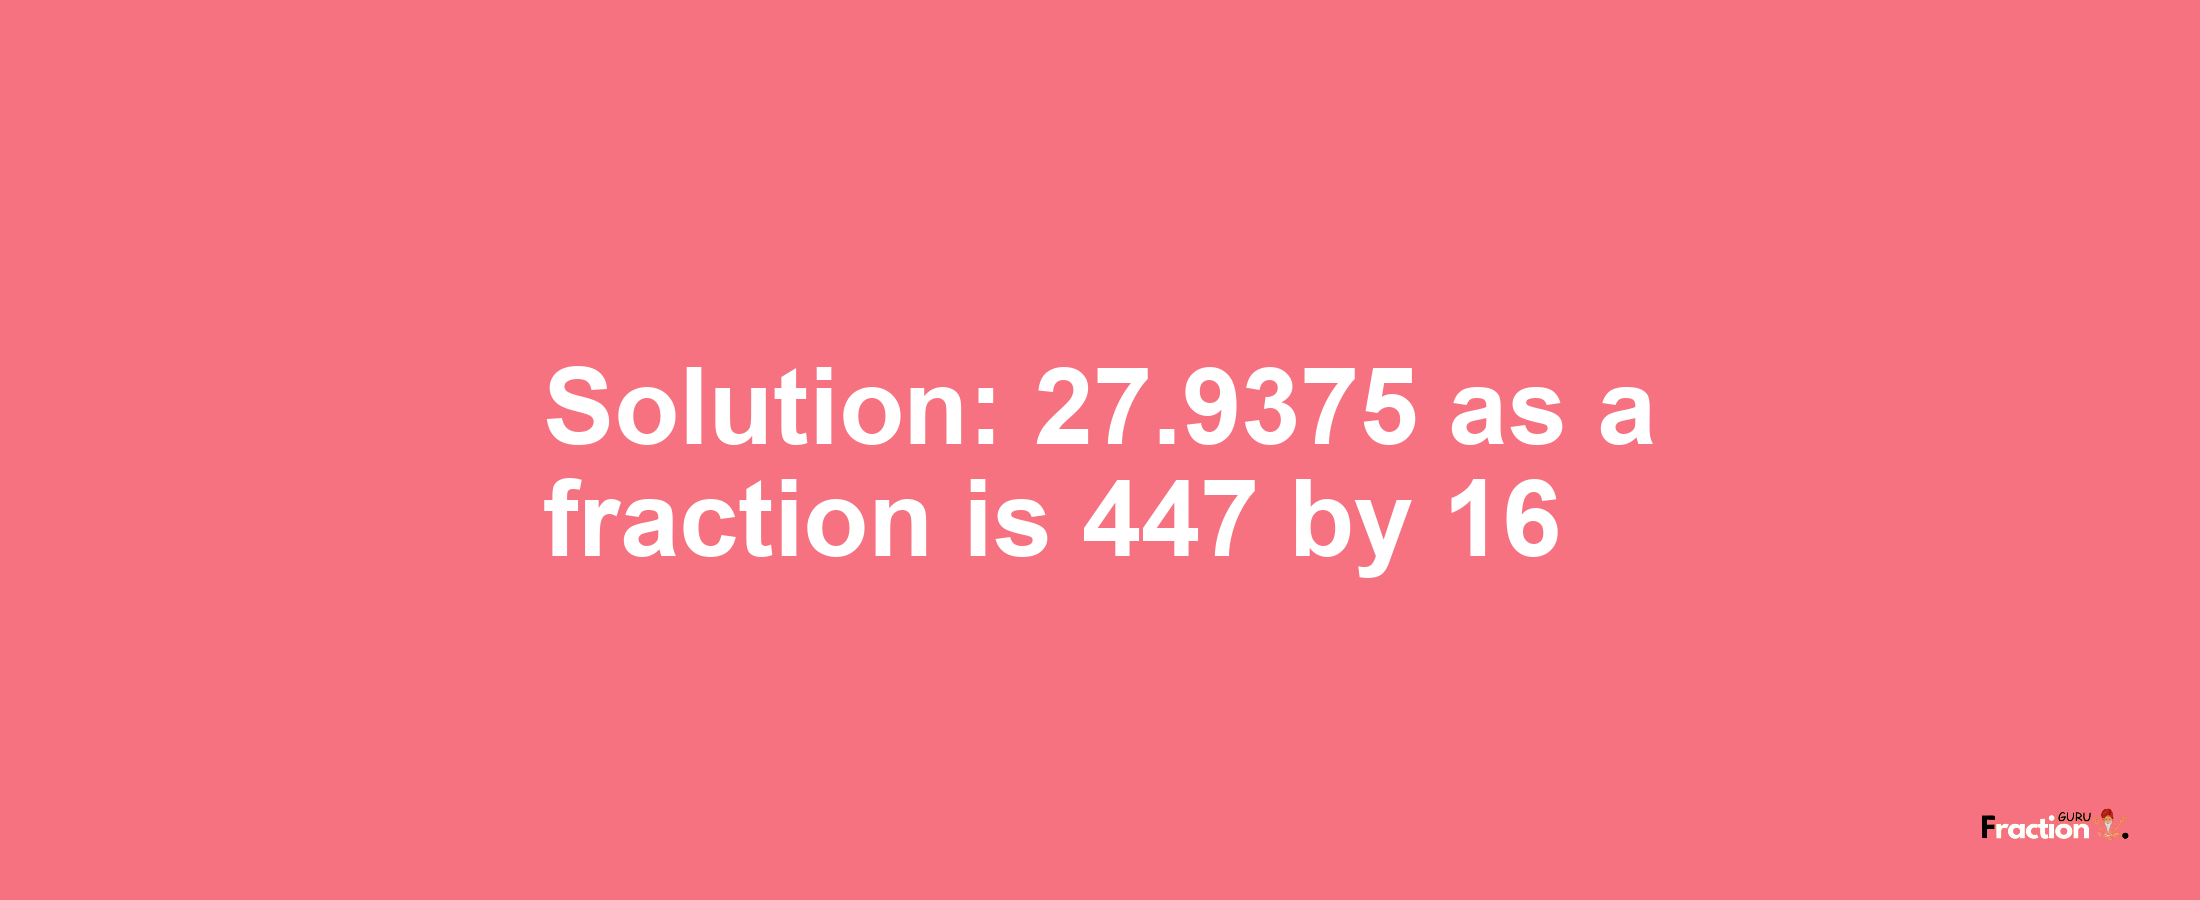 Solution:27.9375 as a fraction is 447/16